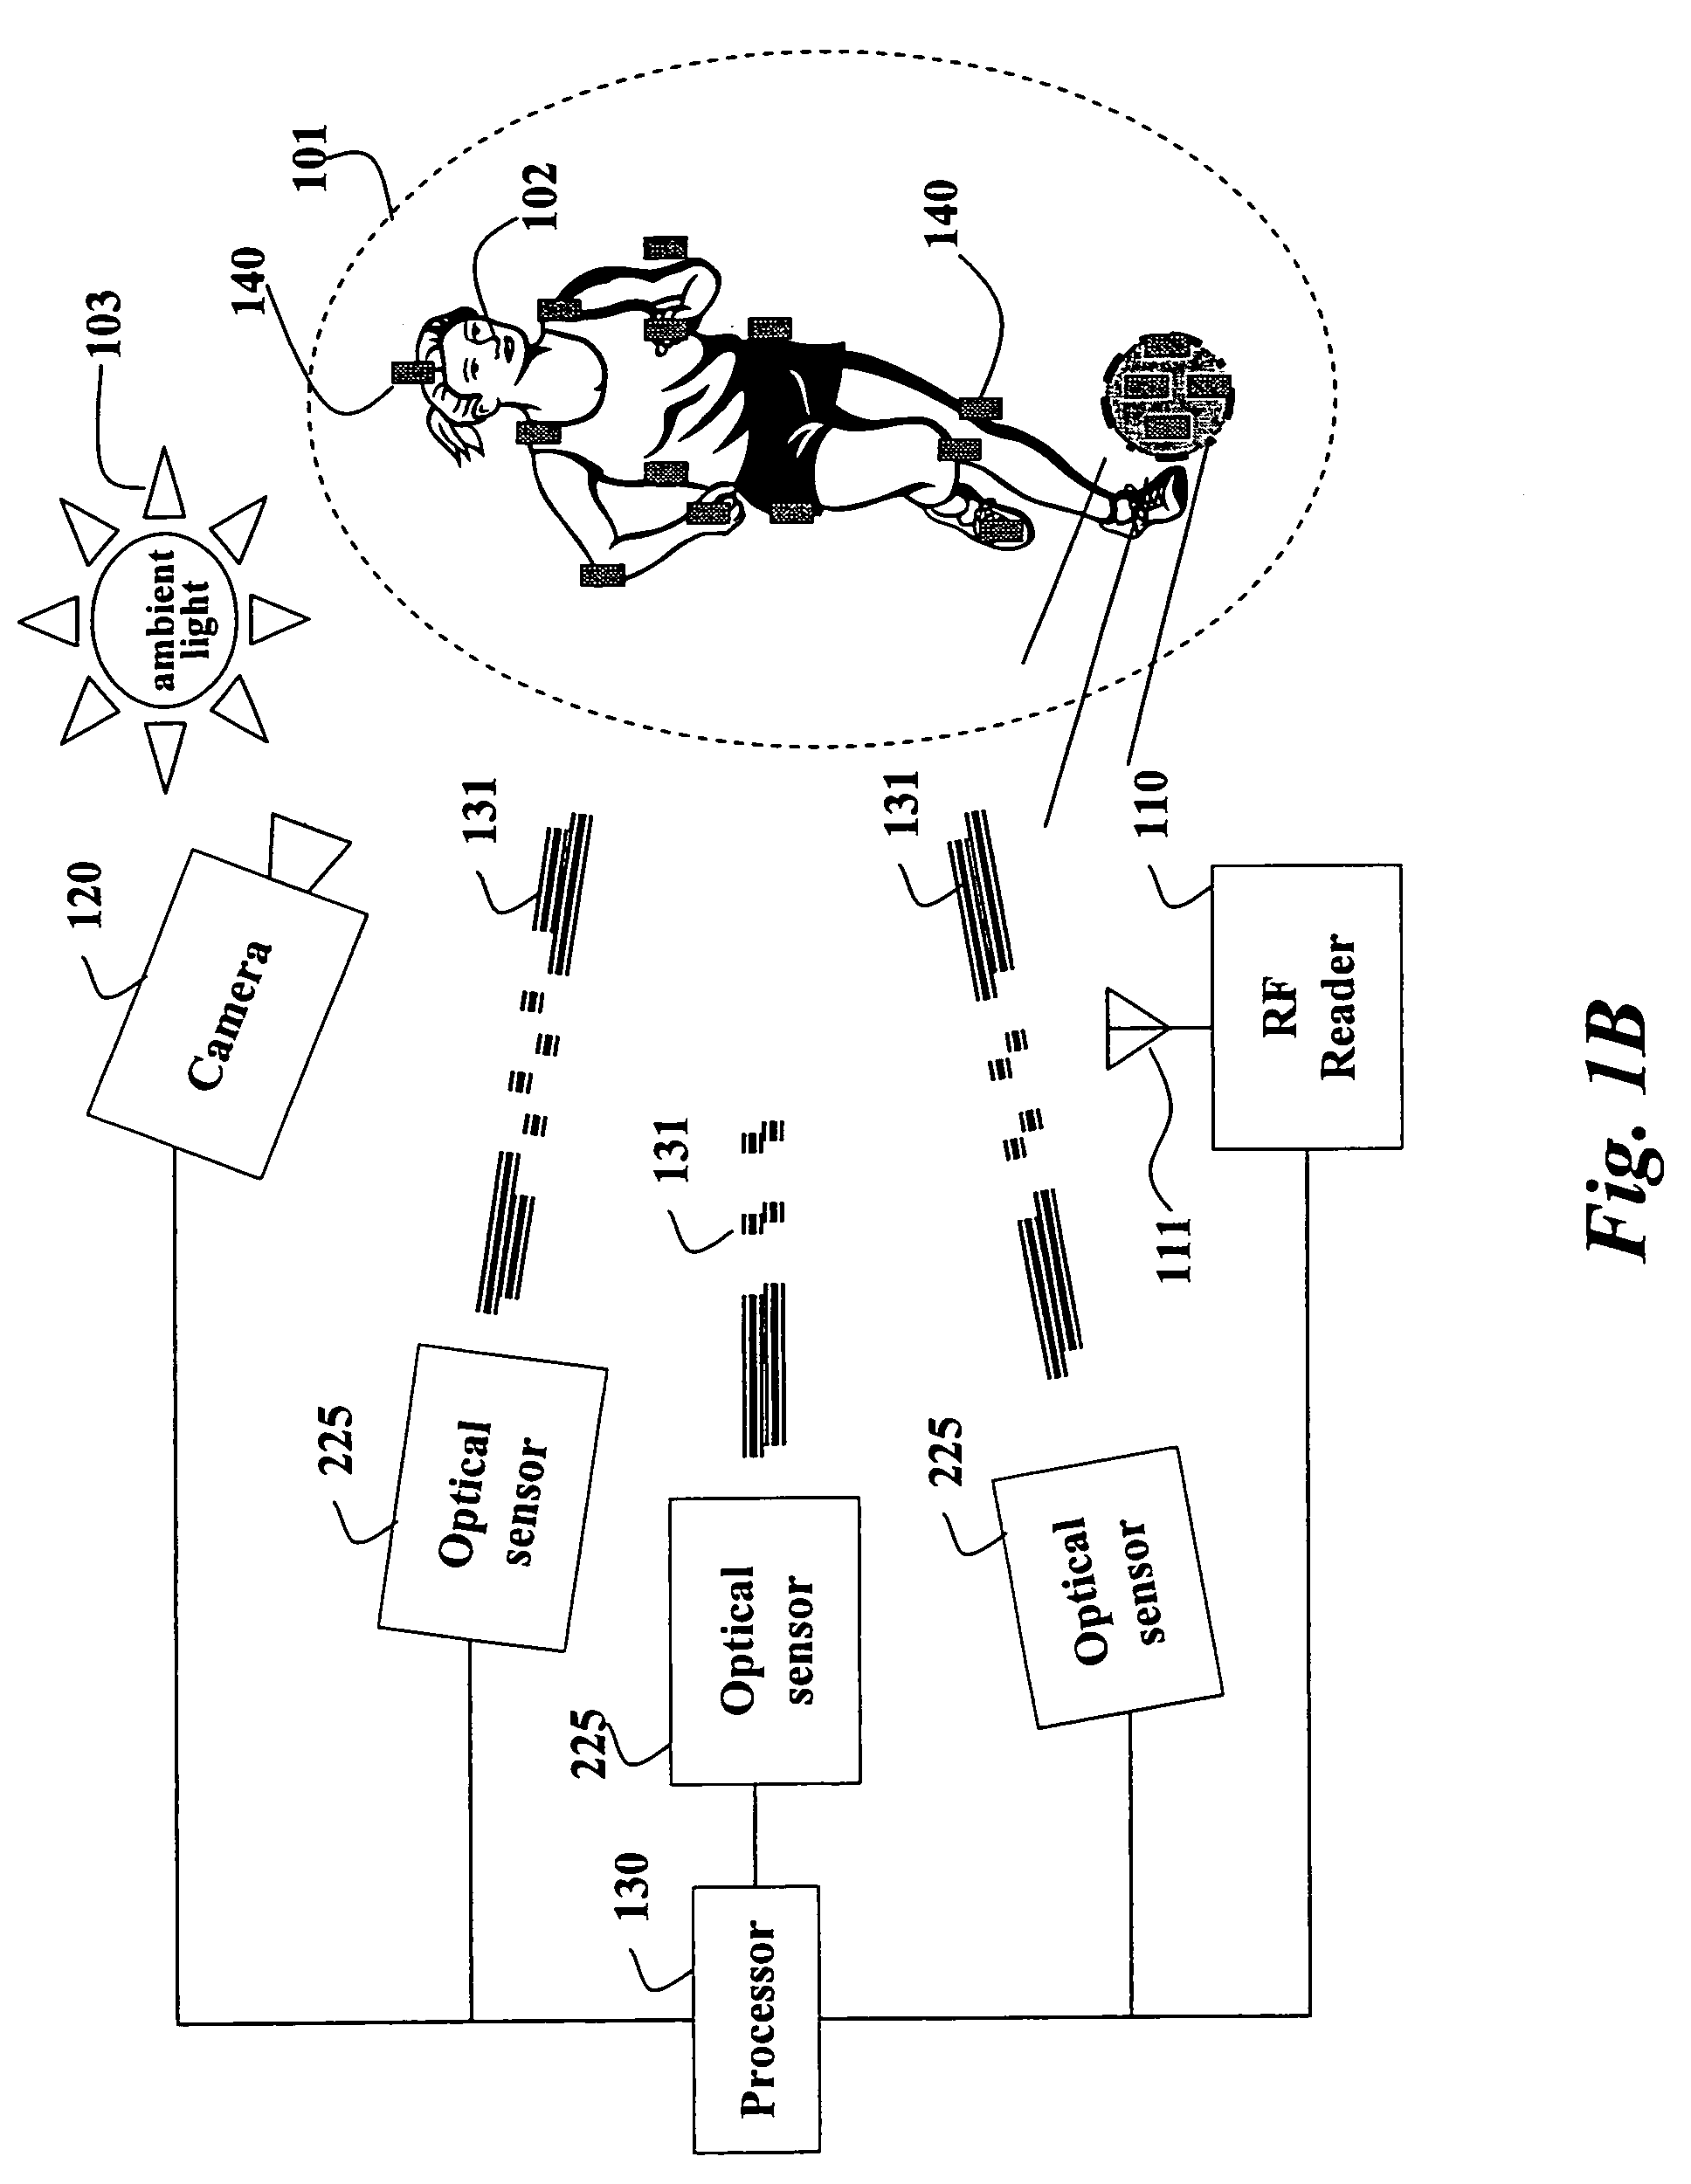 System and method for sensing geometric and photometric attributes of a scene with multiplexed illumination and solid state optical devices